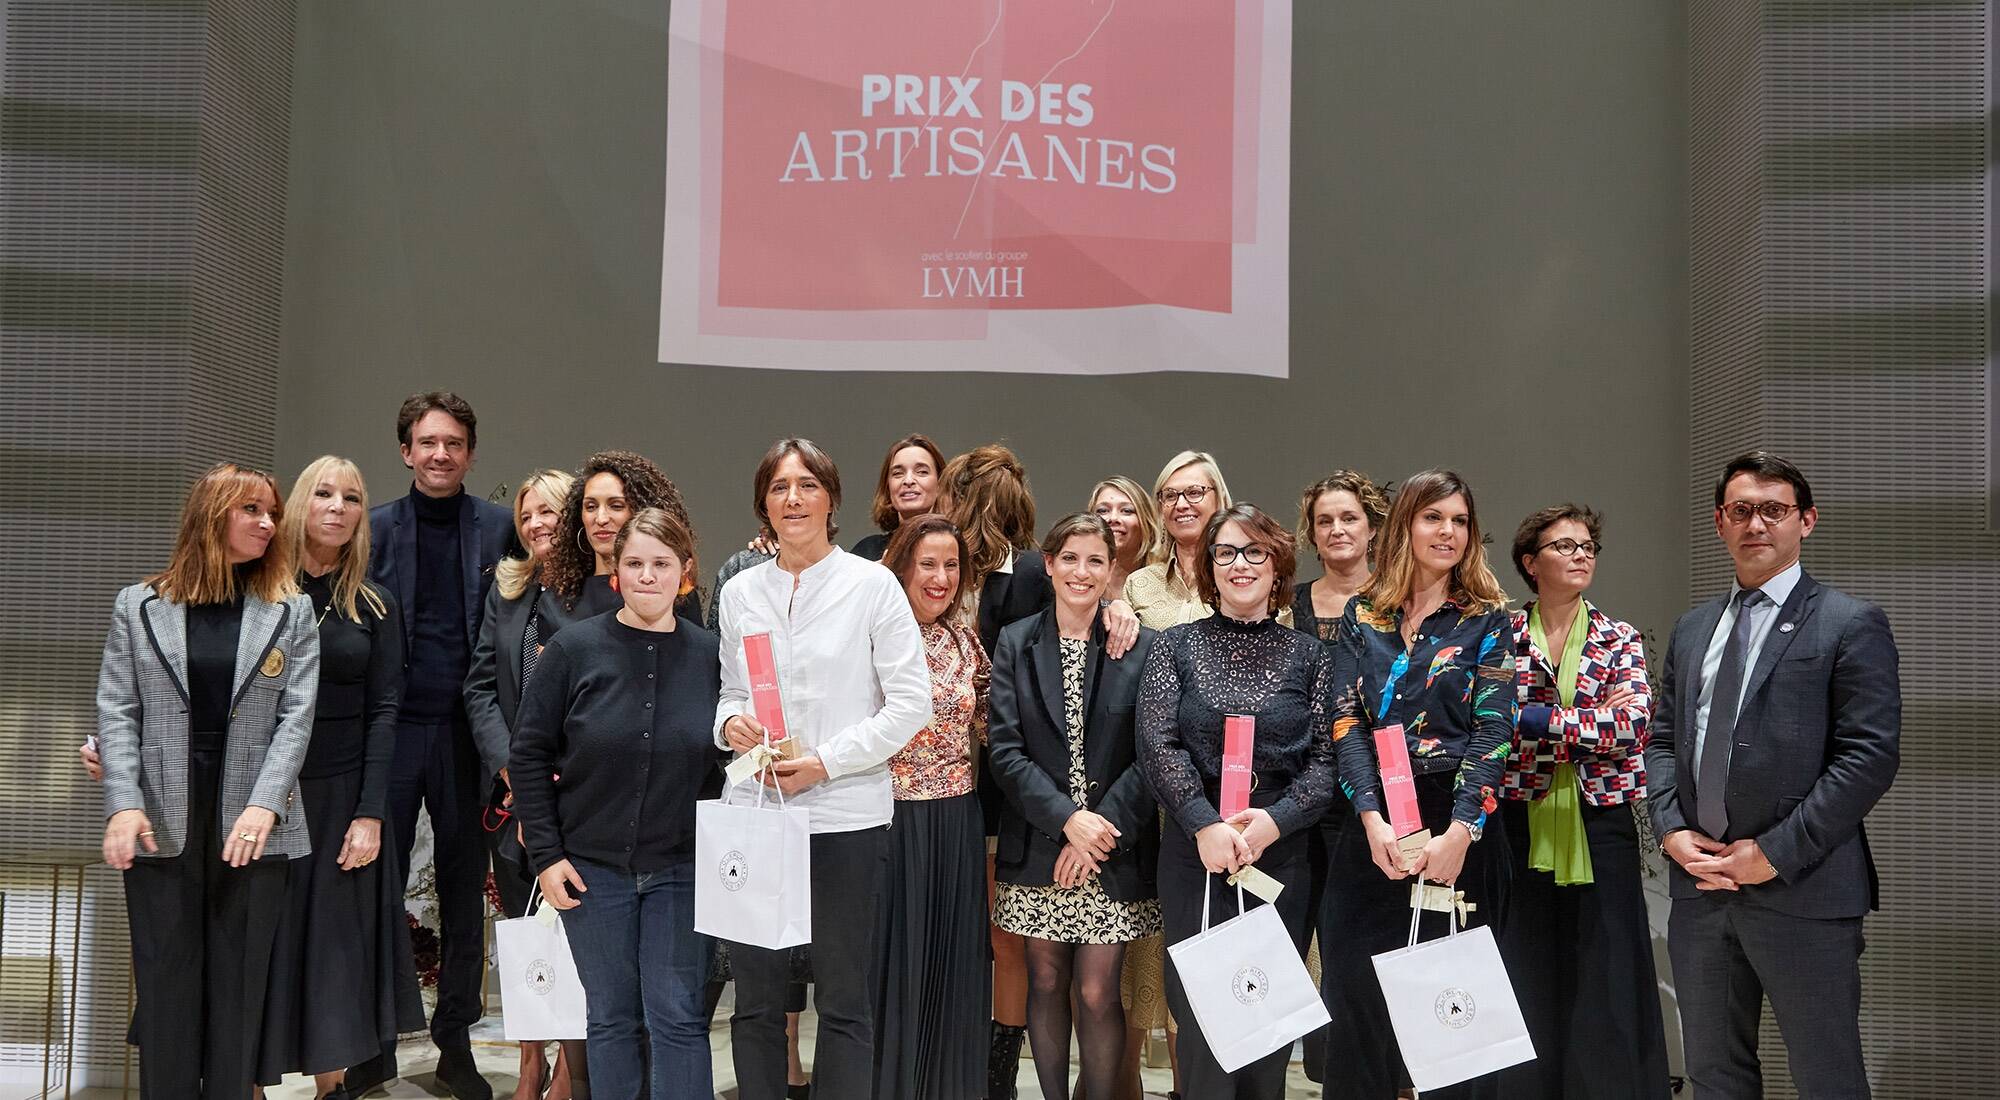 LVMH supports the ELLE magazines in the launch of the Prix des